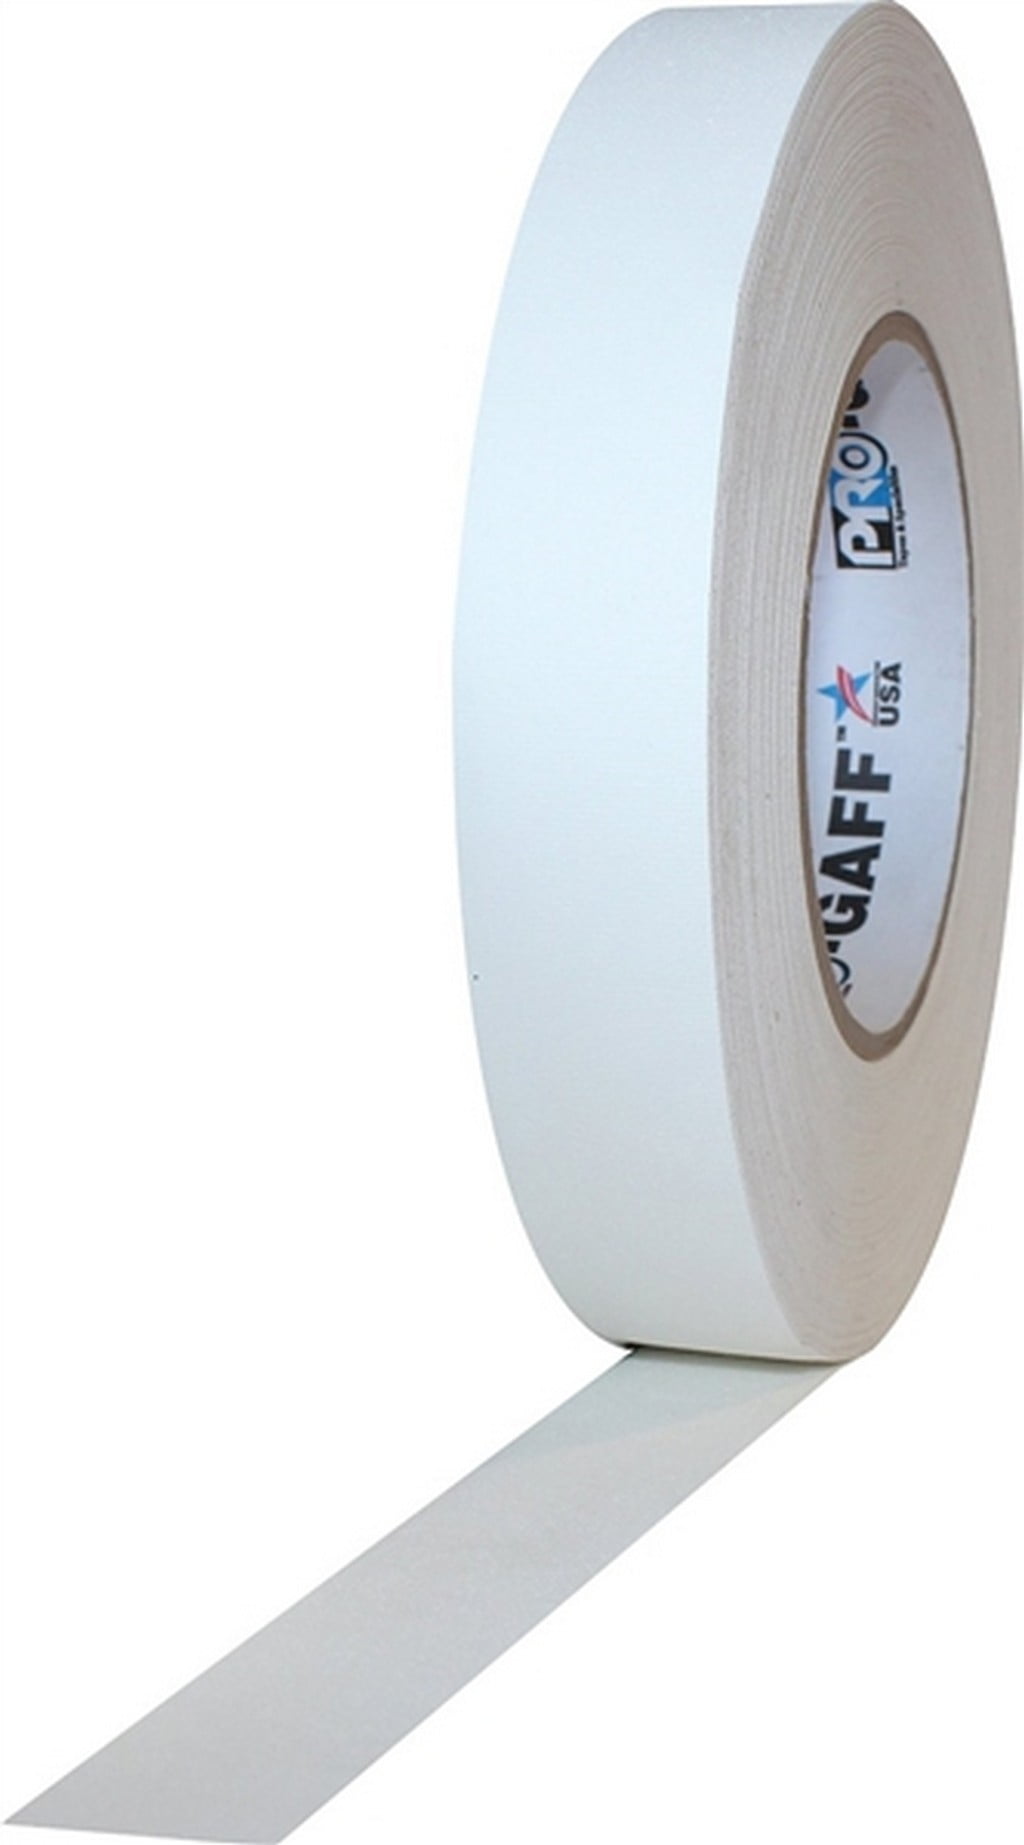 White Main Stage Gaff Tape 2 inch by 30 Yard Roll Easy to Gaffers Tape 